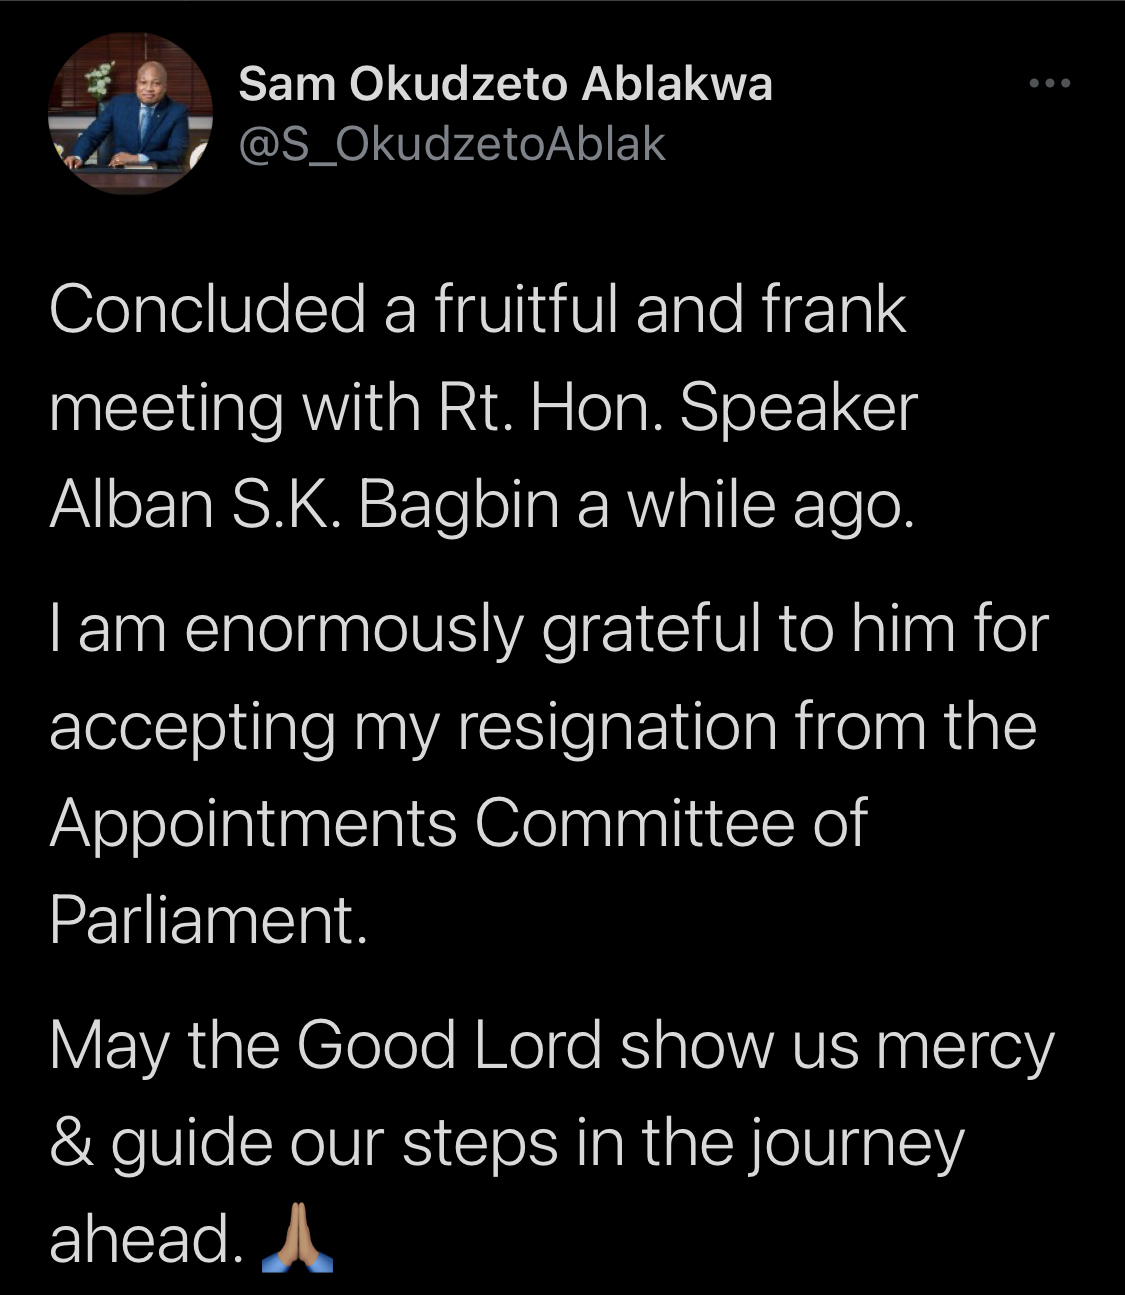 Bagbin accepts Ablakwa’s resignation from Appointments Committee